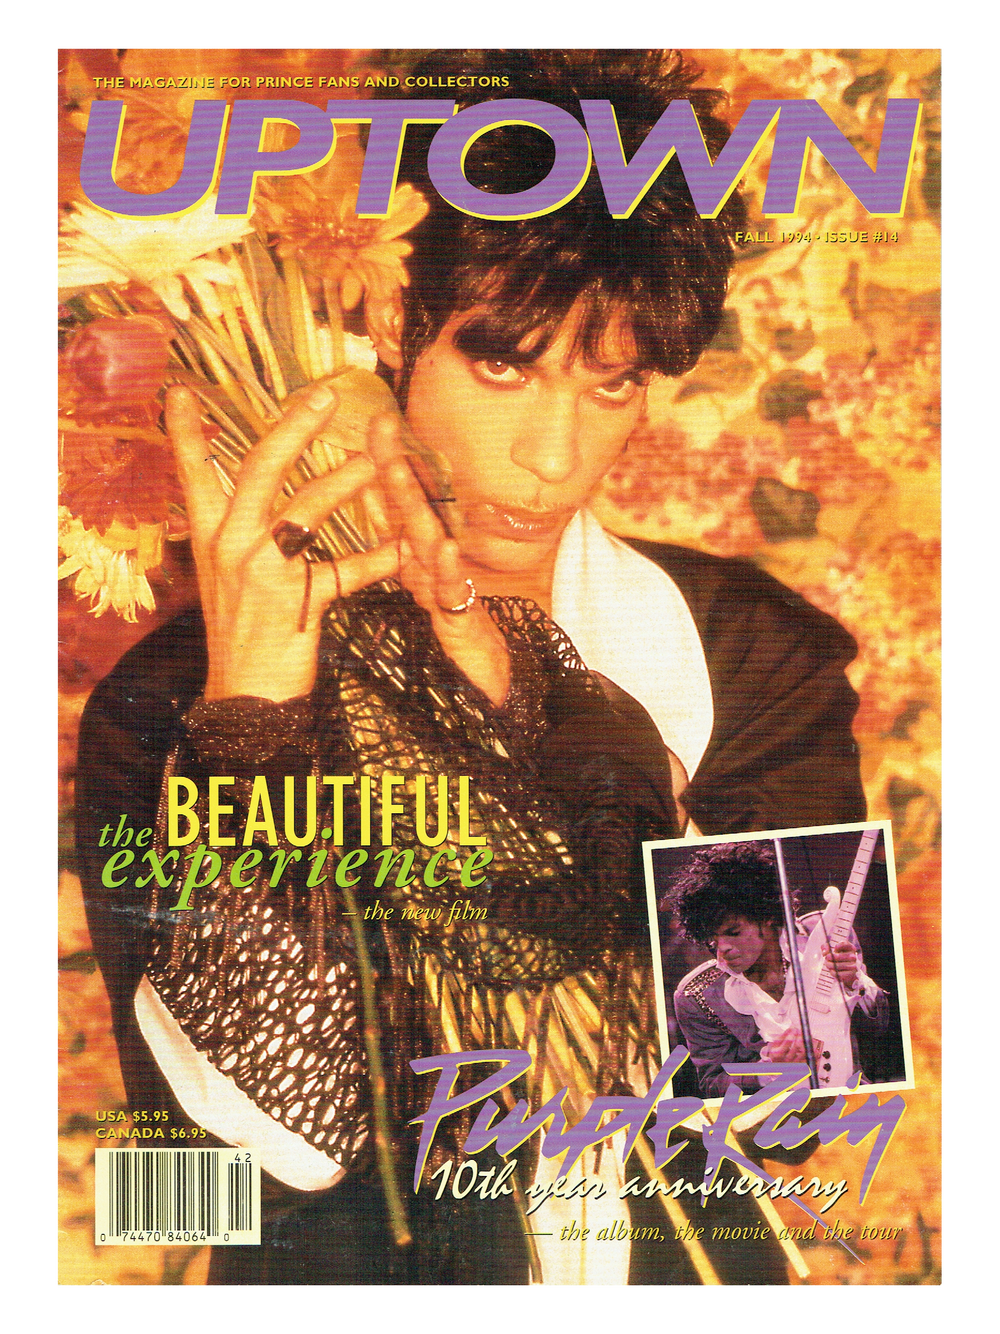 Uptown The Magazine For Prince Fans & Collectors Issue Number 14